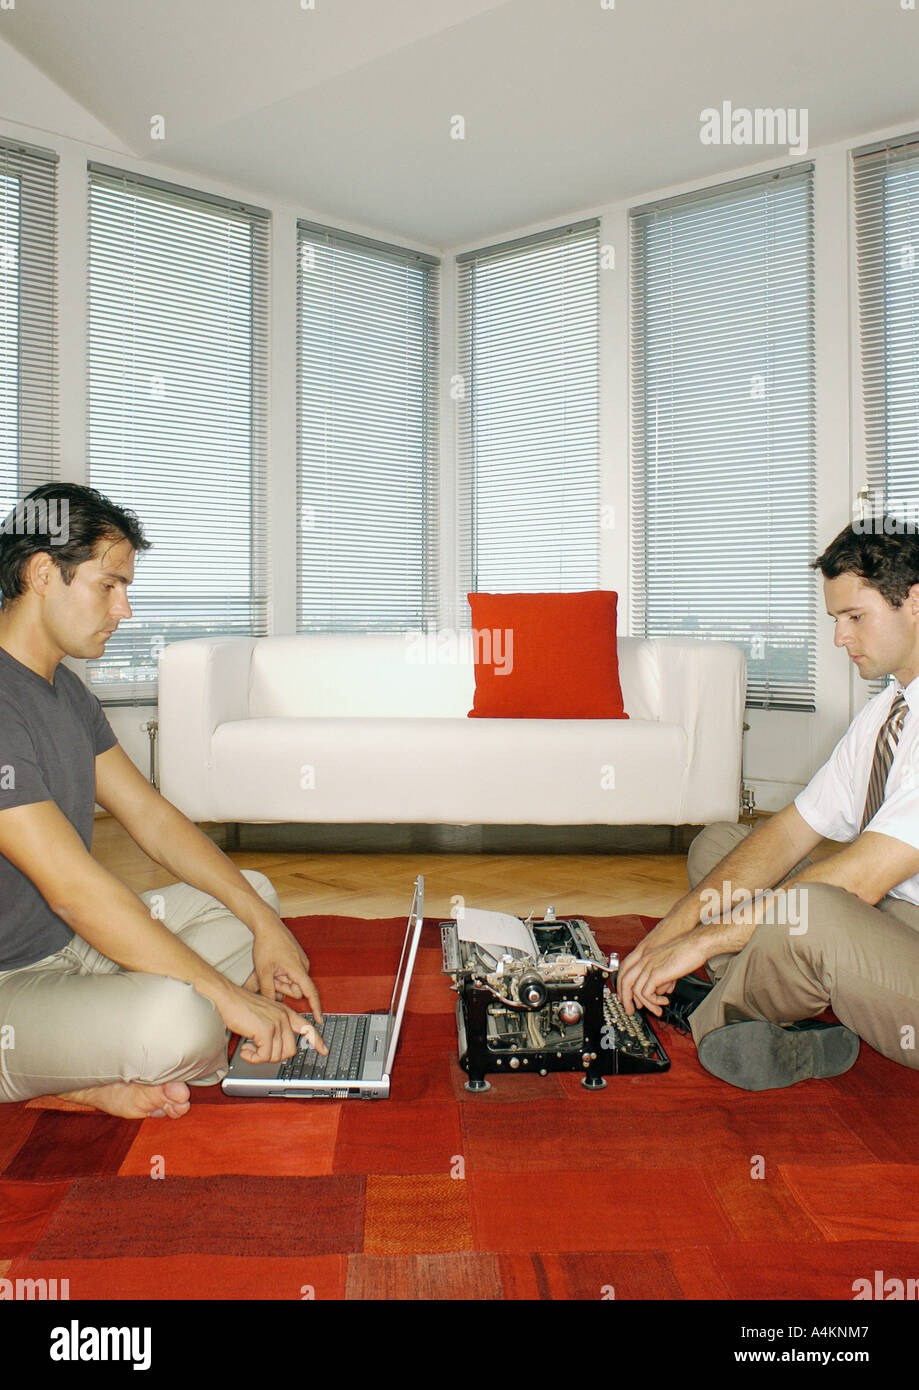 Man using laptop computer and second man using typewriter, side view Stock Photo